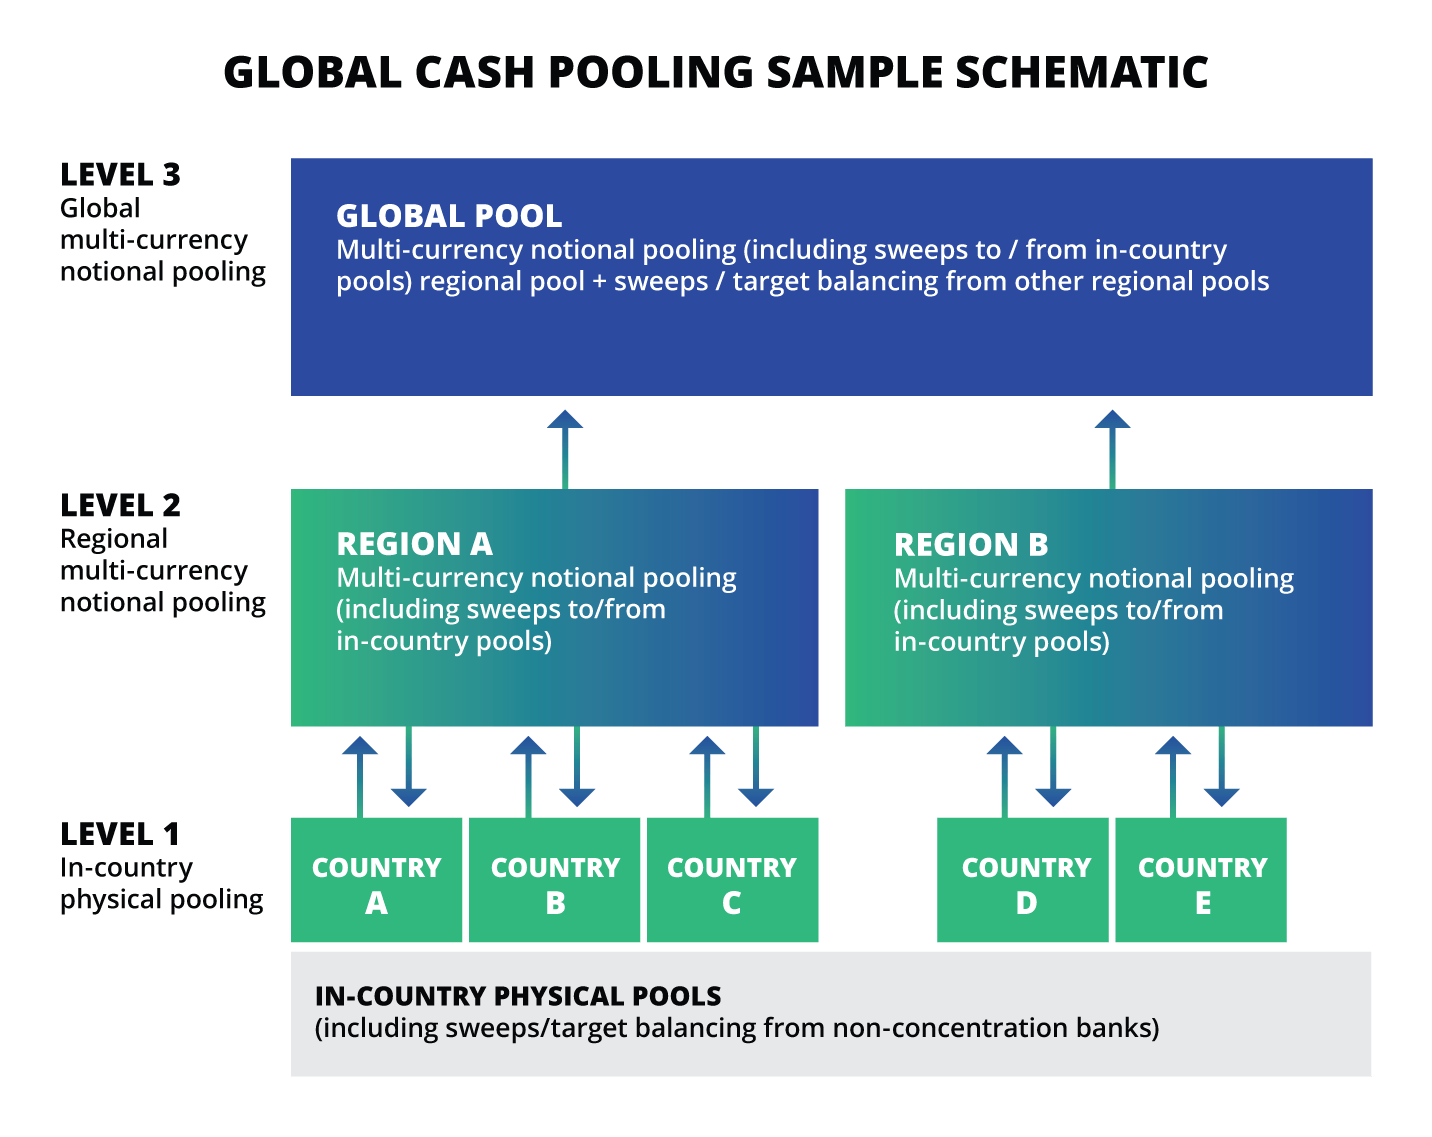 Global Cash Pooling Sample Schematic